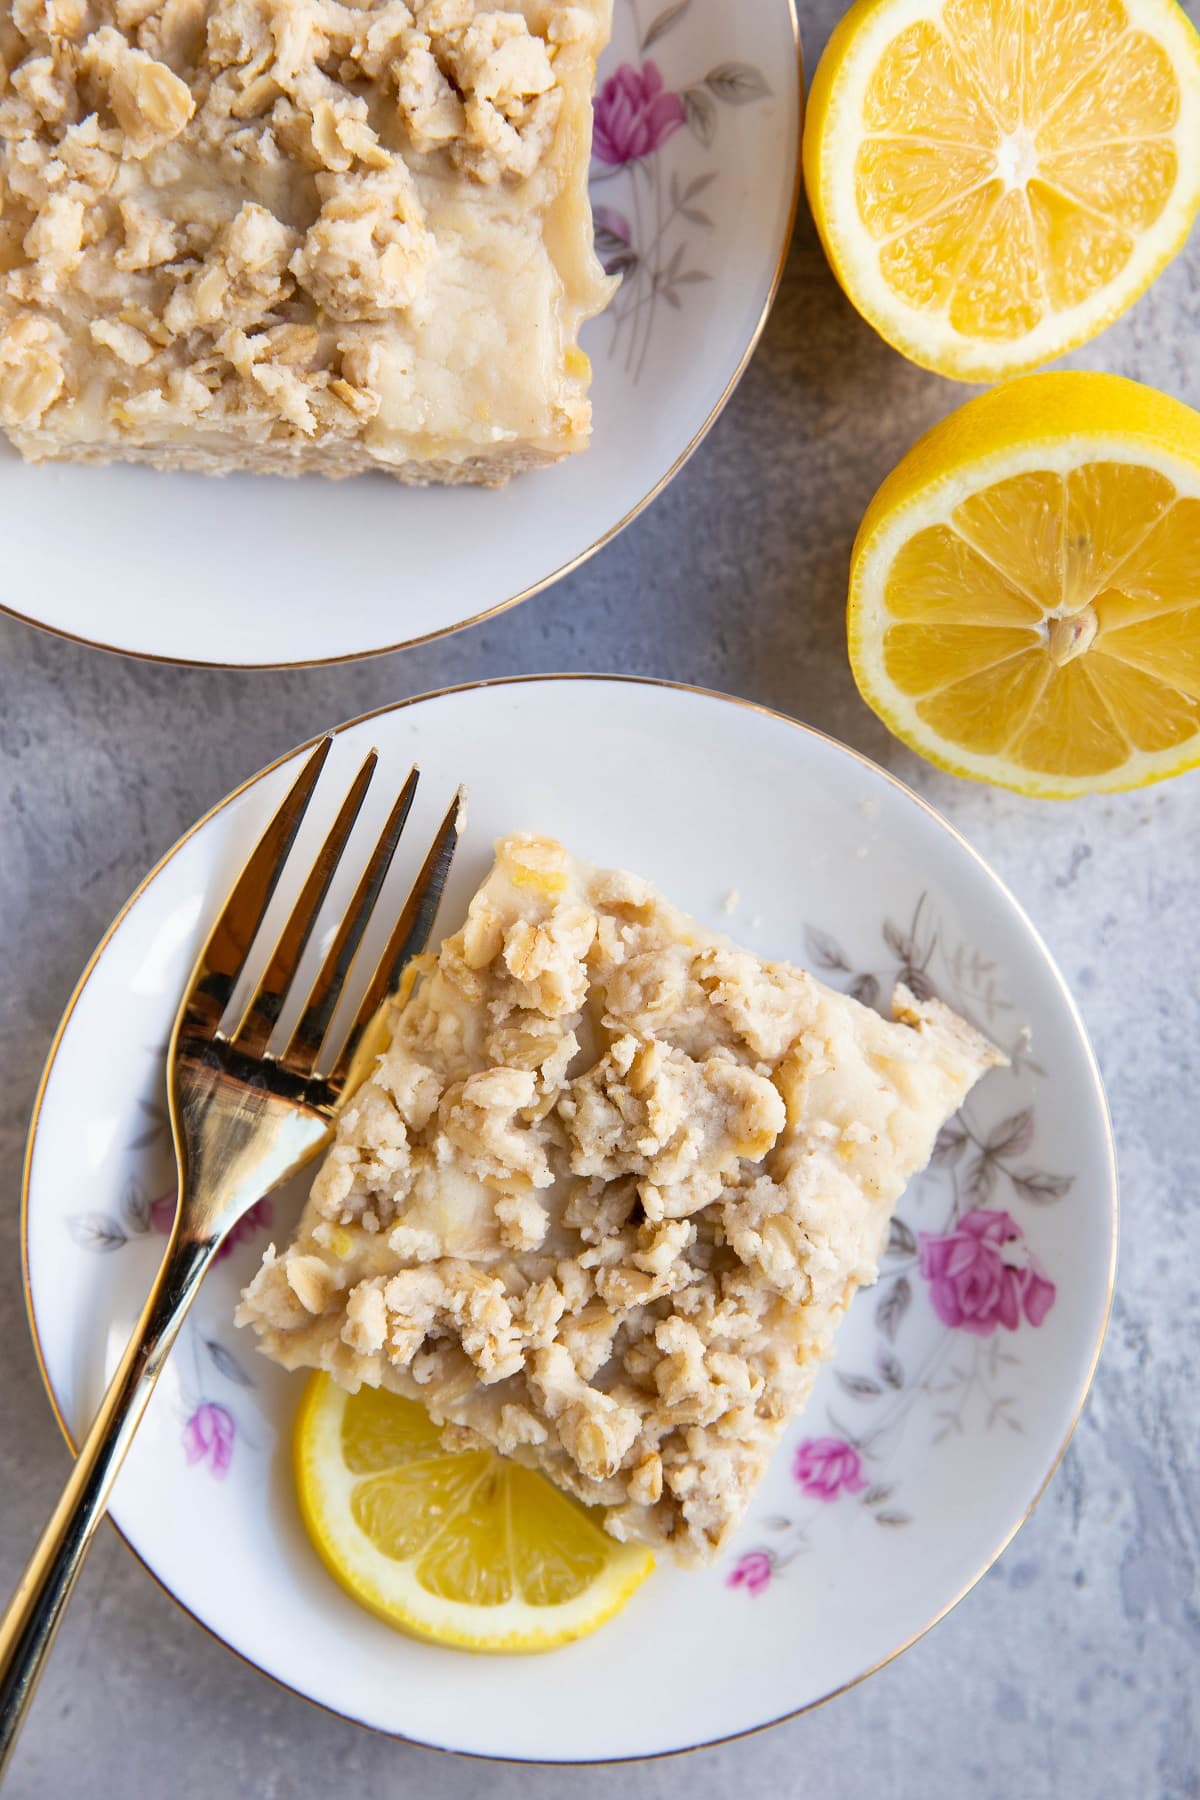 Two plates with slices of lemon crumb bars, ready to eat.